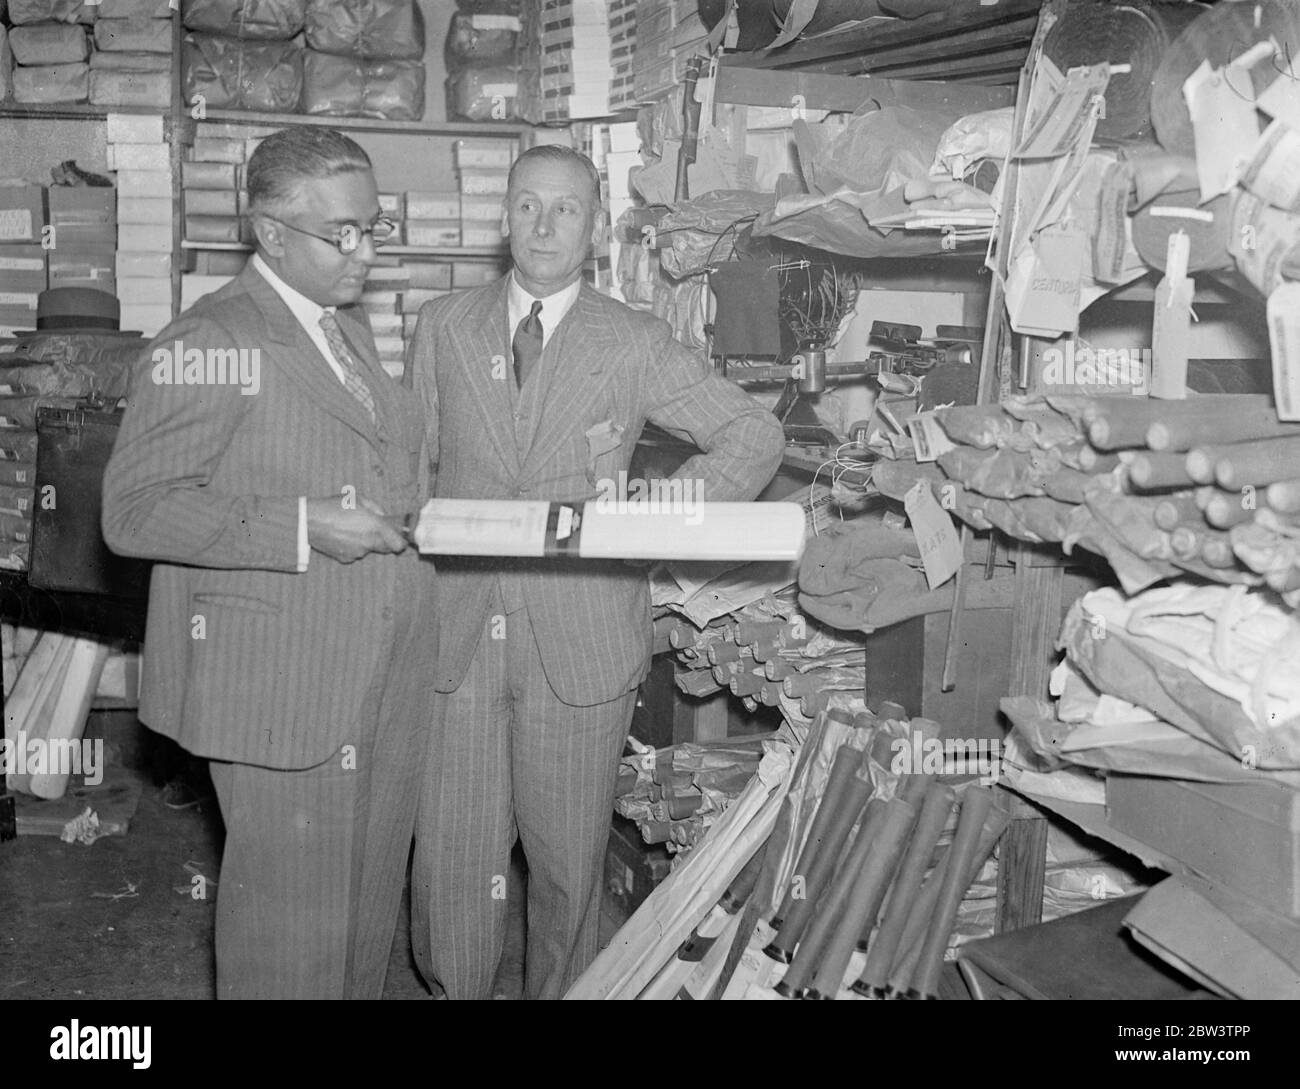 Maharajah Kumar of Vizian Agram , all India cricket captain , selects cricket bats with the help of Jack Hobbs . The Maharajah Kumar of Vizianagram , captain of the All India cricket team which has just arrived for an English tour , received the assistance of Jack Hobbs , batting giant of other days , when he went to Hobbs sports equipment shop in Fleet Street , E C to select cricket bats . Photo shows , the Maharajah Kumar of Vizianagram examining a cricket bat with Jack Hobbs . 17 April 1936 17 April 1936 Stock Photo